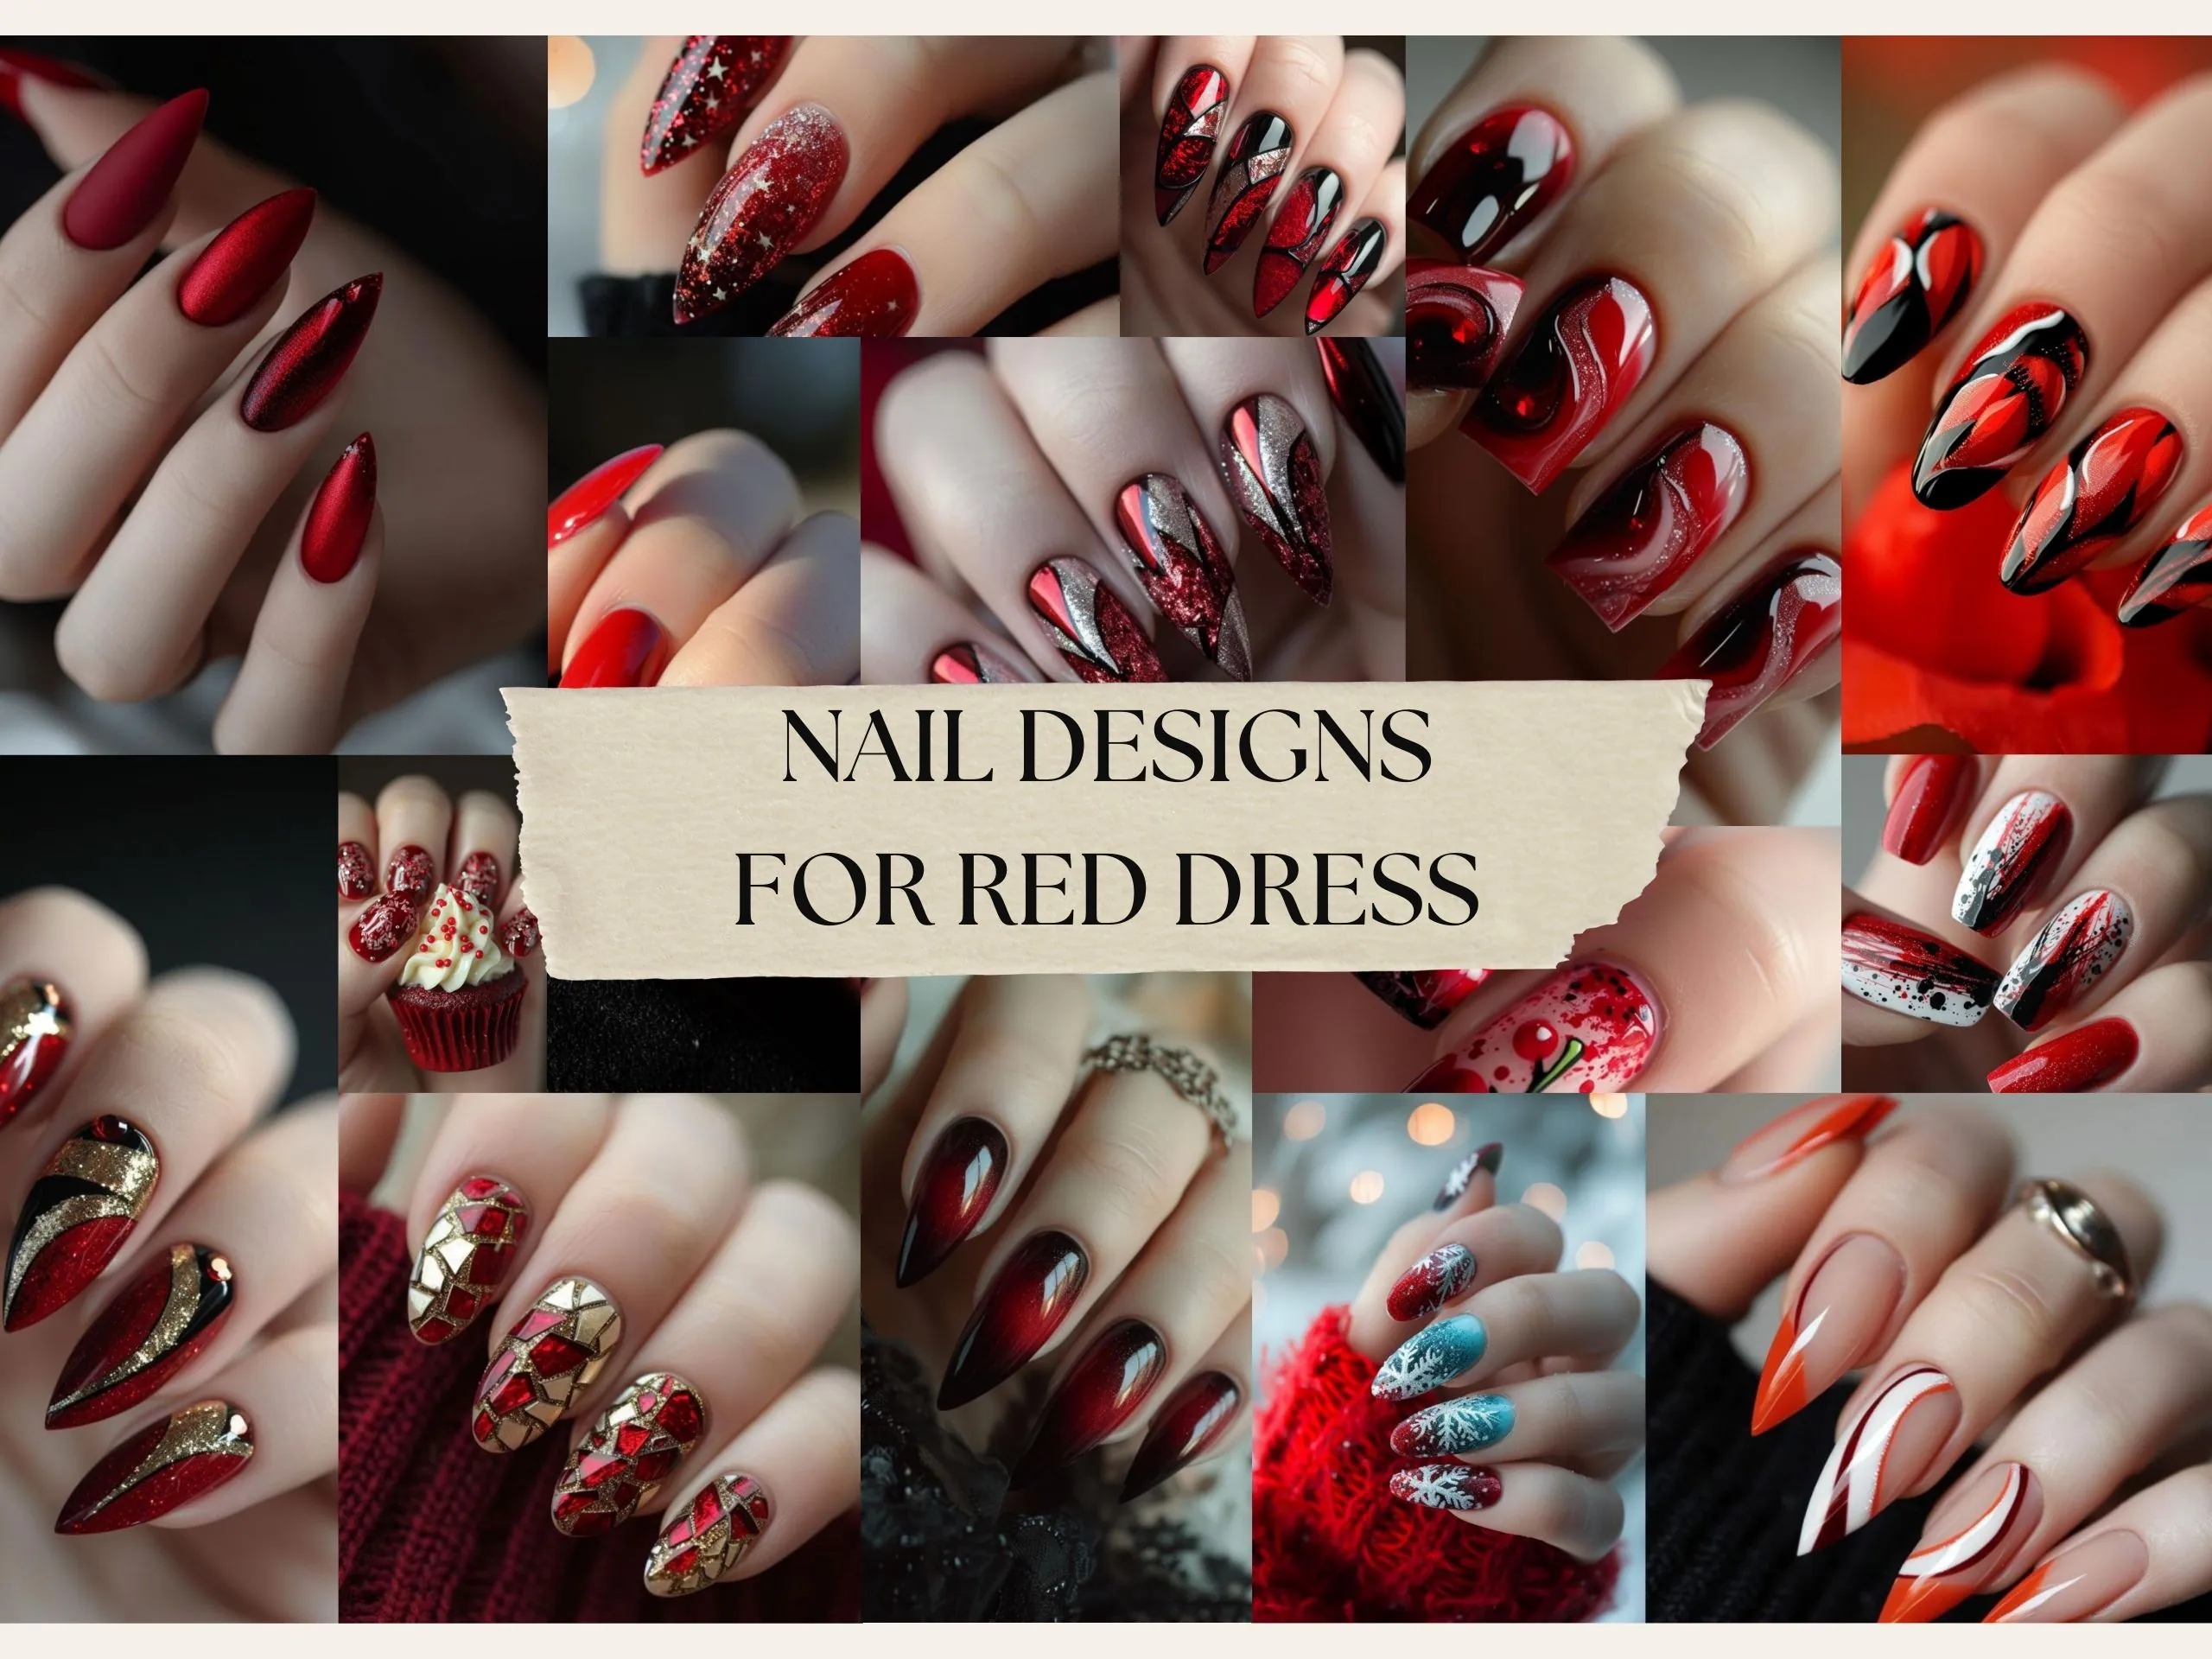 Sizzling Style: Nail Design for Red Dress!